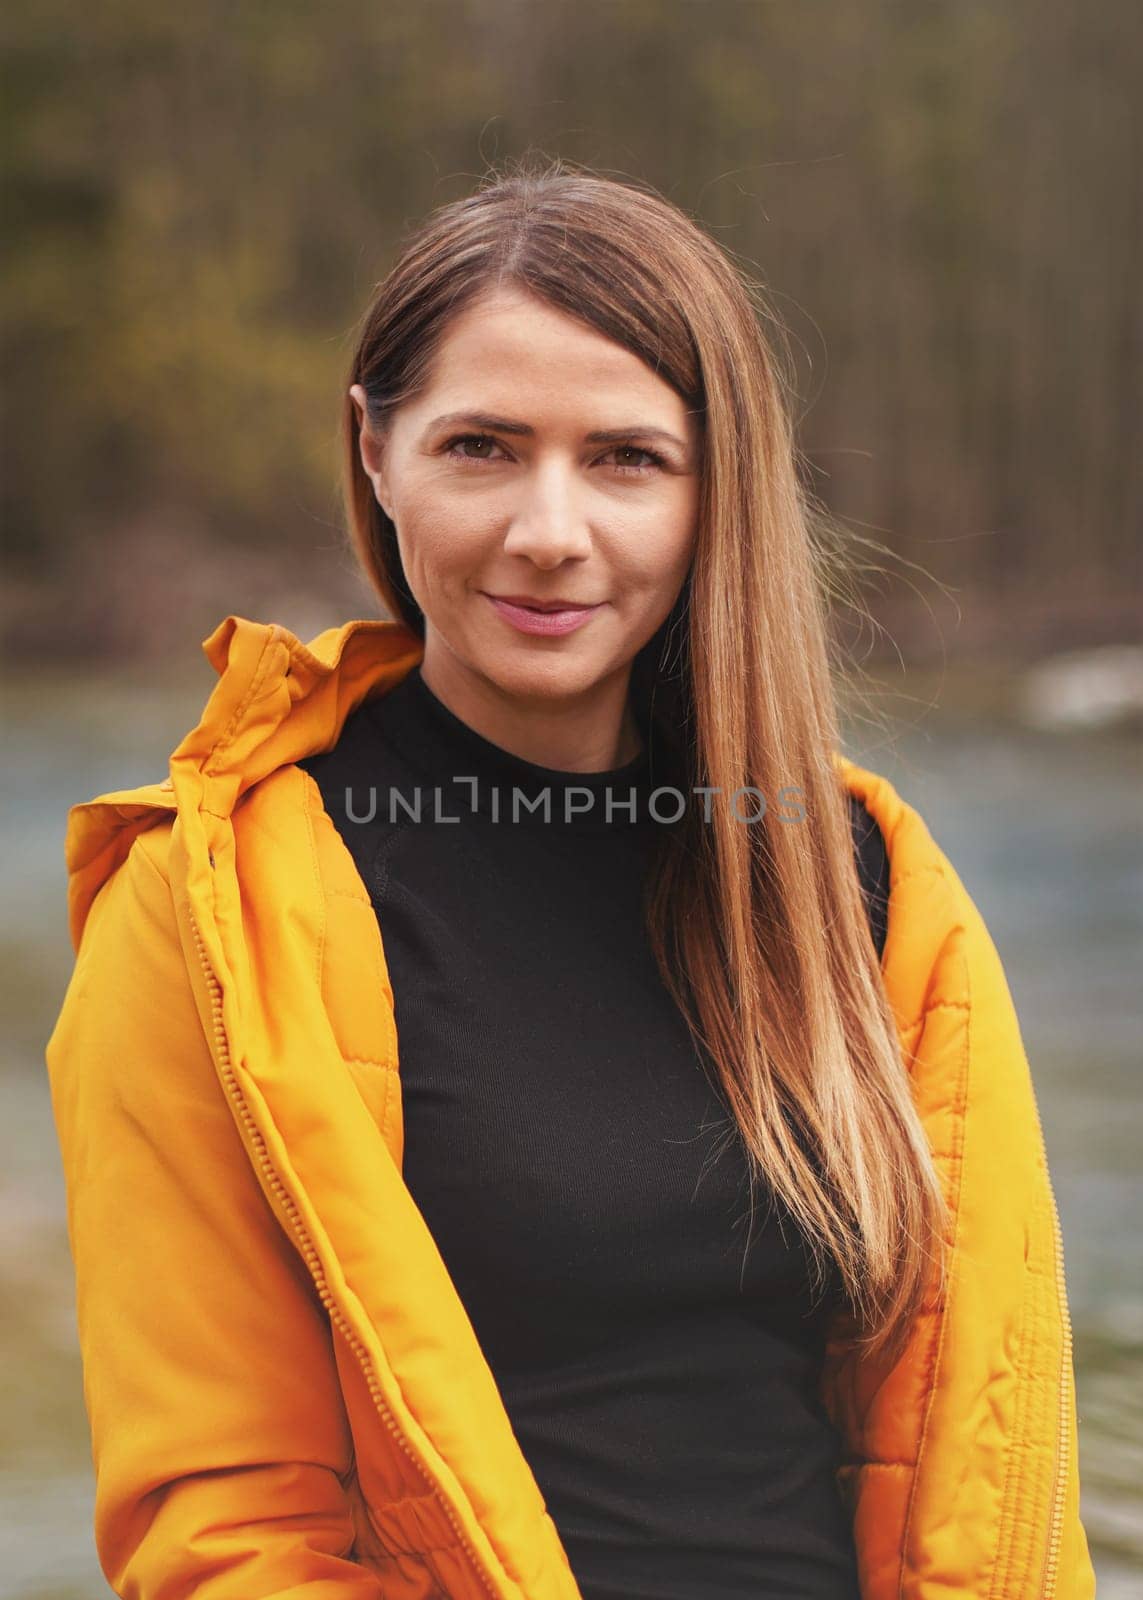 Portrait of young woman in yellow jacket, smiling, long hair down, blurred trees and river background by Ivanko